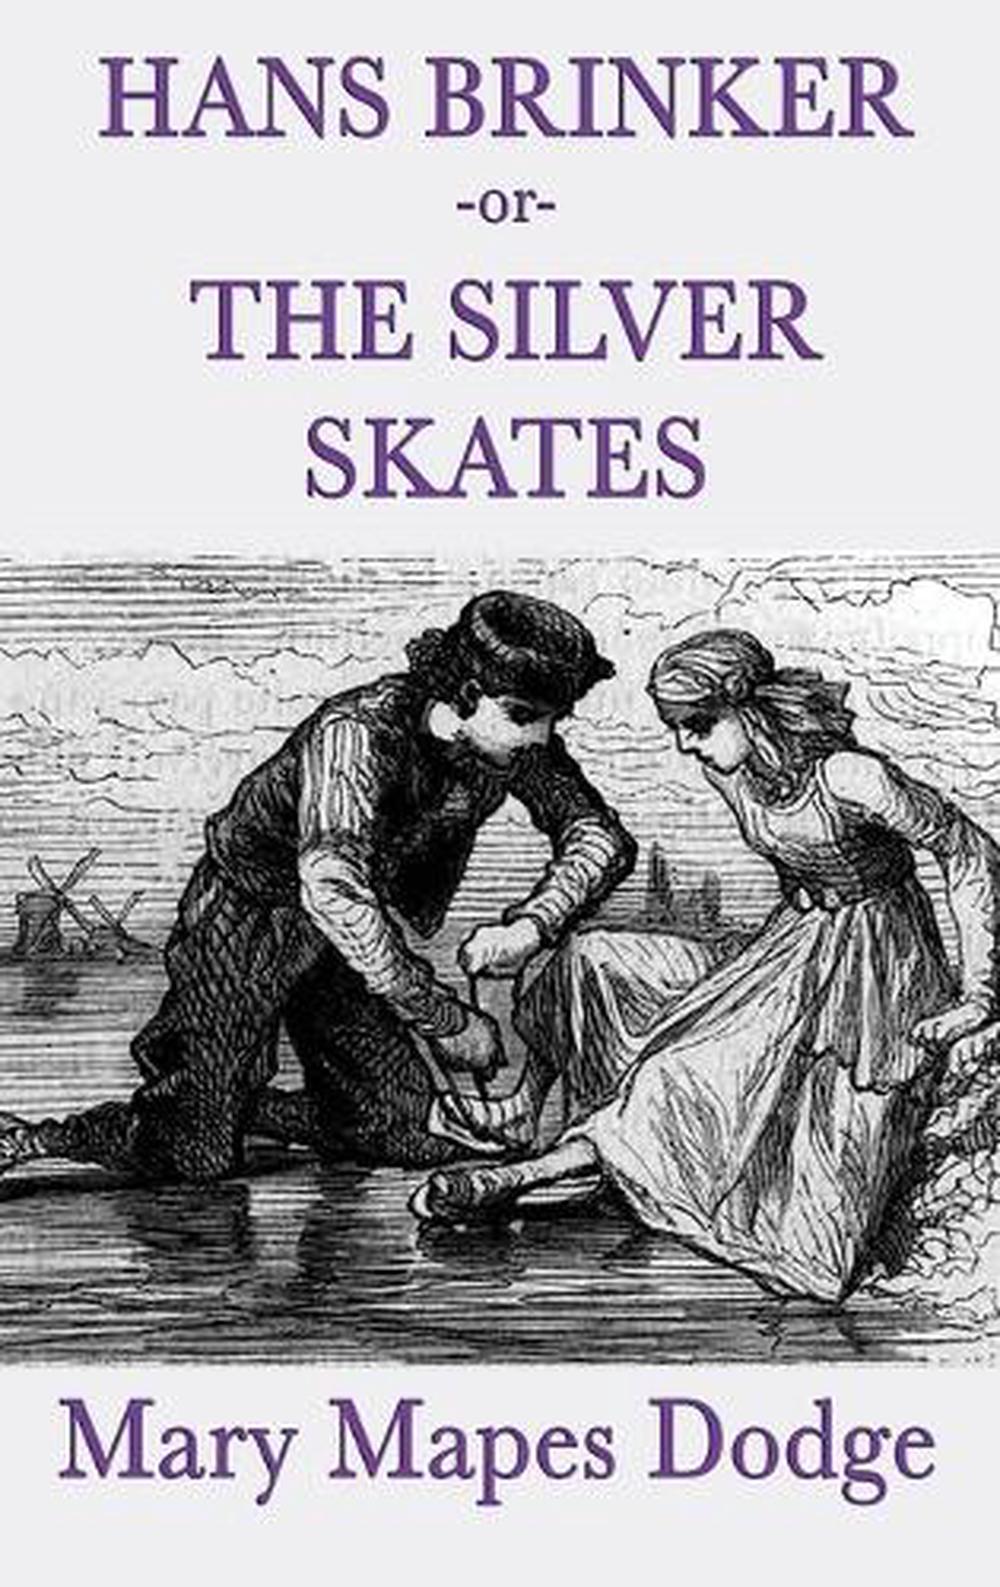 Hans Brinker, or The Silver Skates by Mary Mapes Dodge